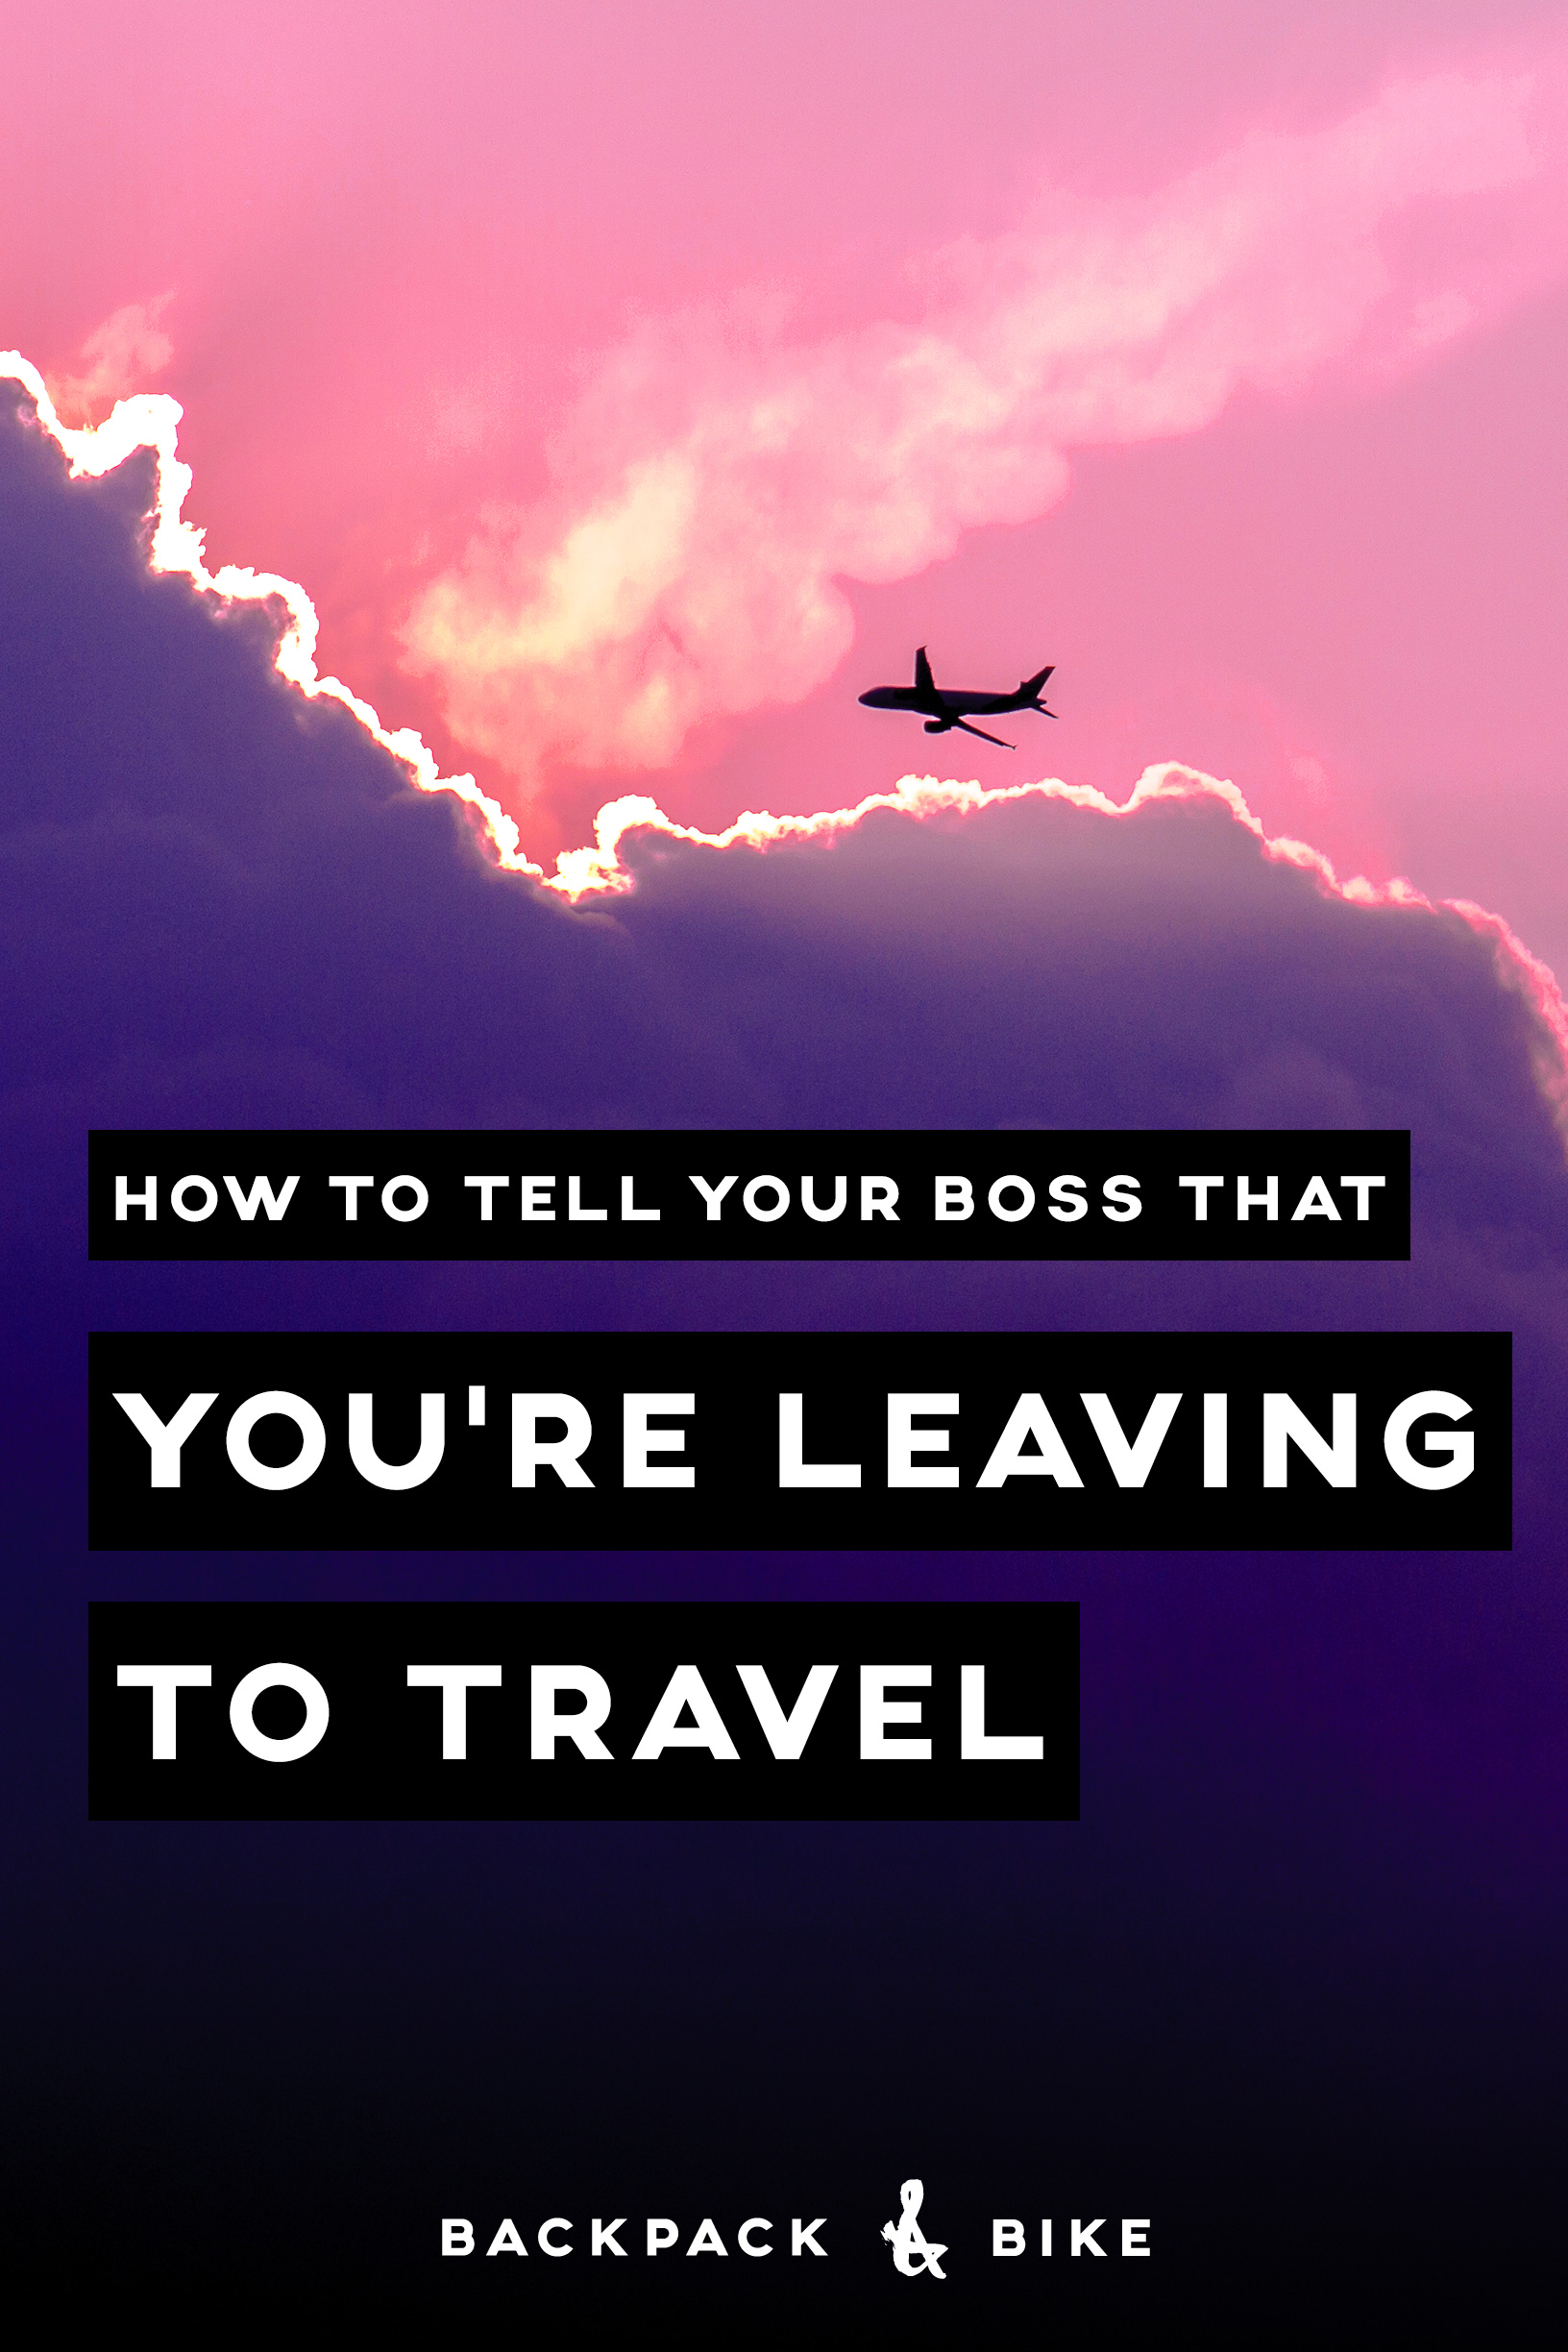 Thinking about how to tell your boss you're leaving to travel? Here are 5 pieces of advice that'll help you plan before your important meeting.